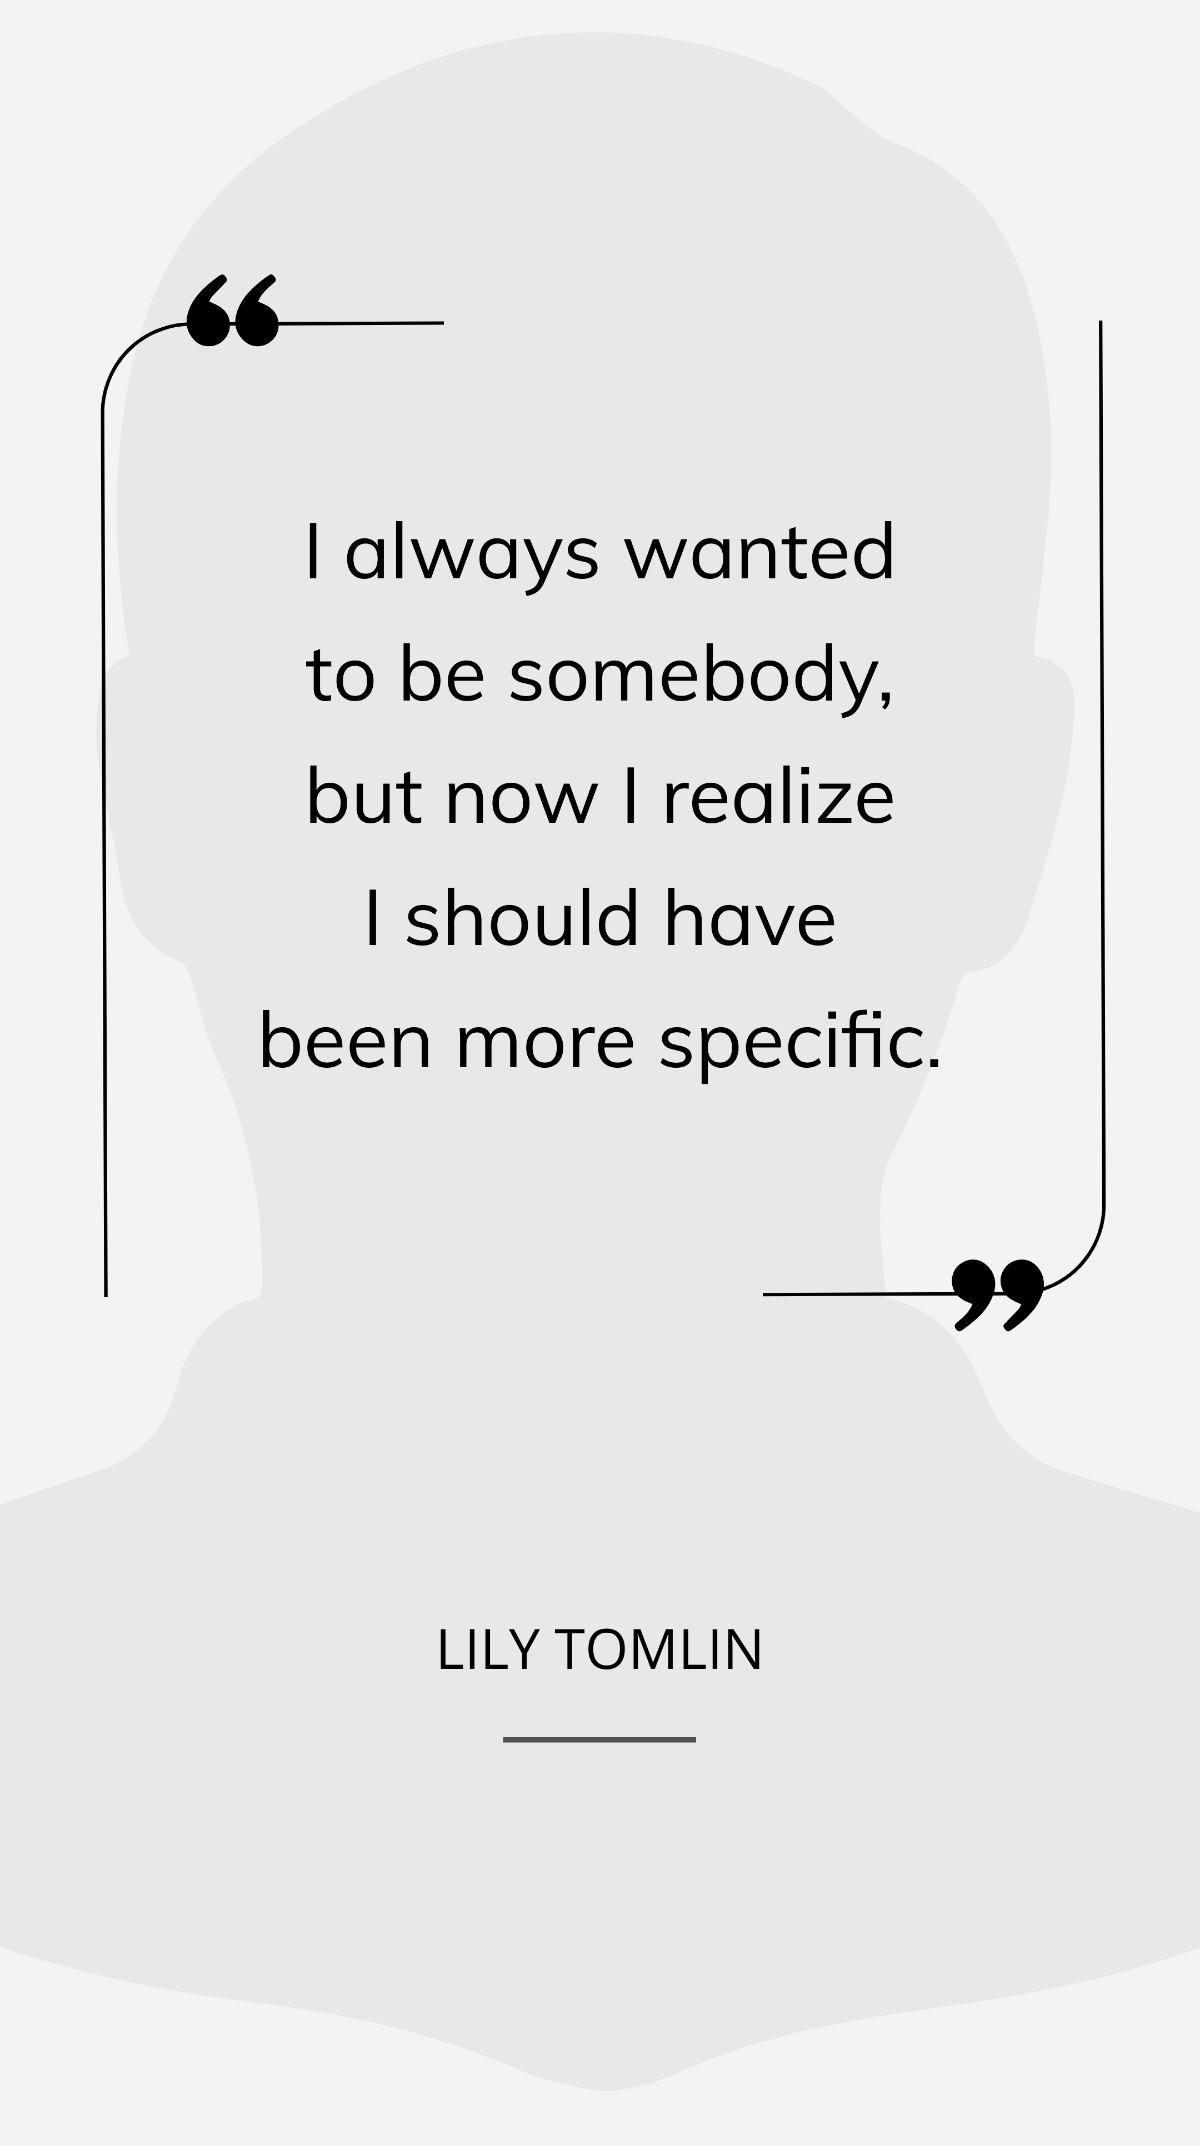 Lily Tomlin - I always wanted to be somebody, but now I realize I should have been more specific.